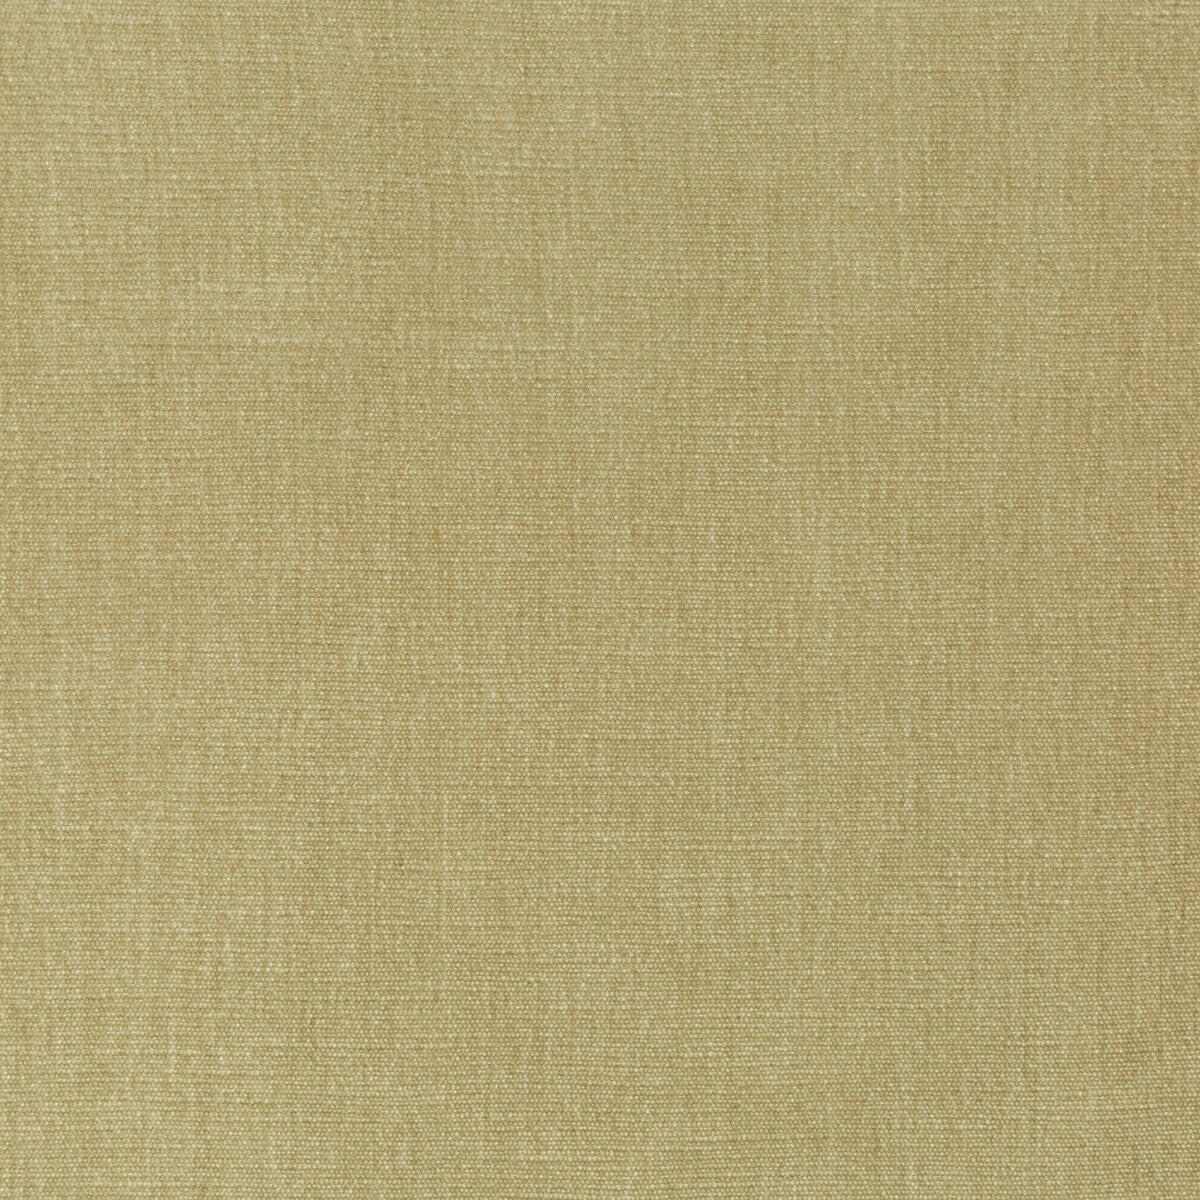 Kravet Smart fabric in 36076-1616 color - pattern 36076.1616.0 - by Kravet Smart in the Sumptuous Chenille II collection